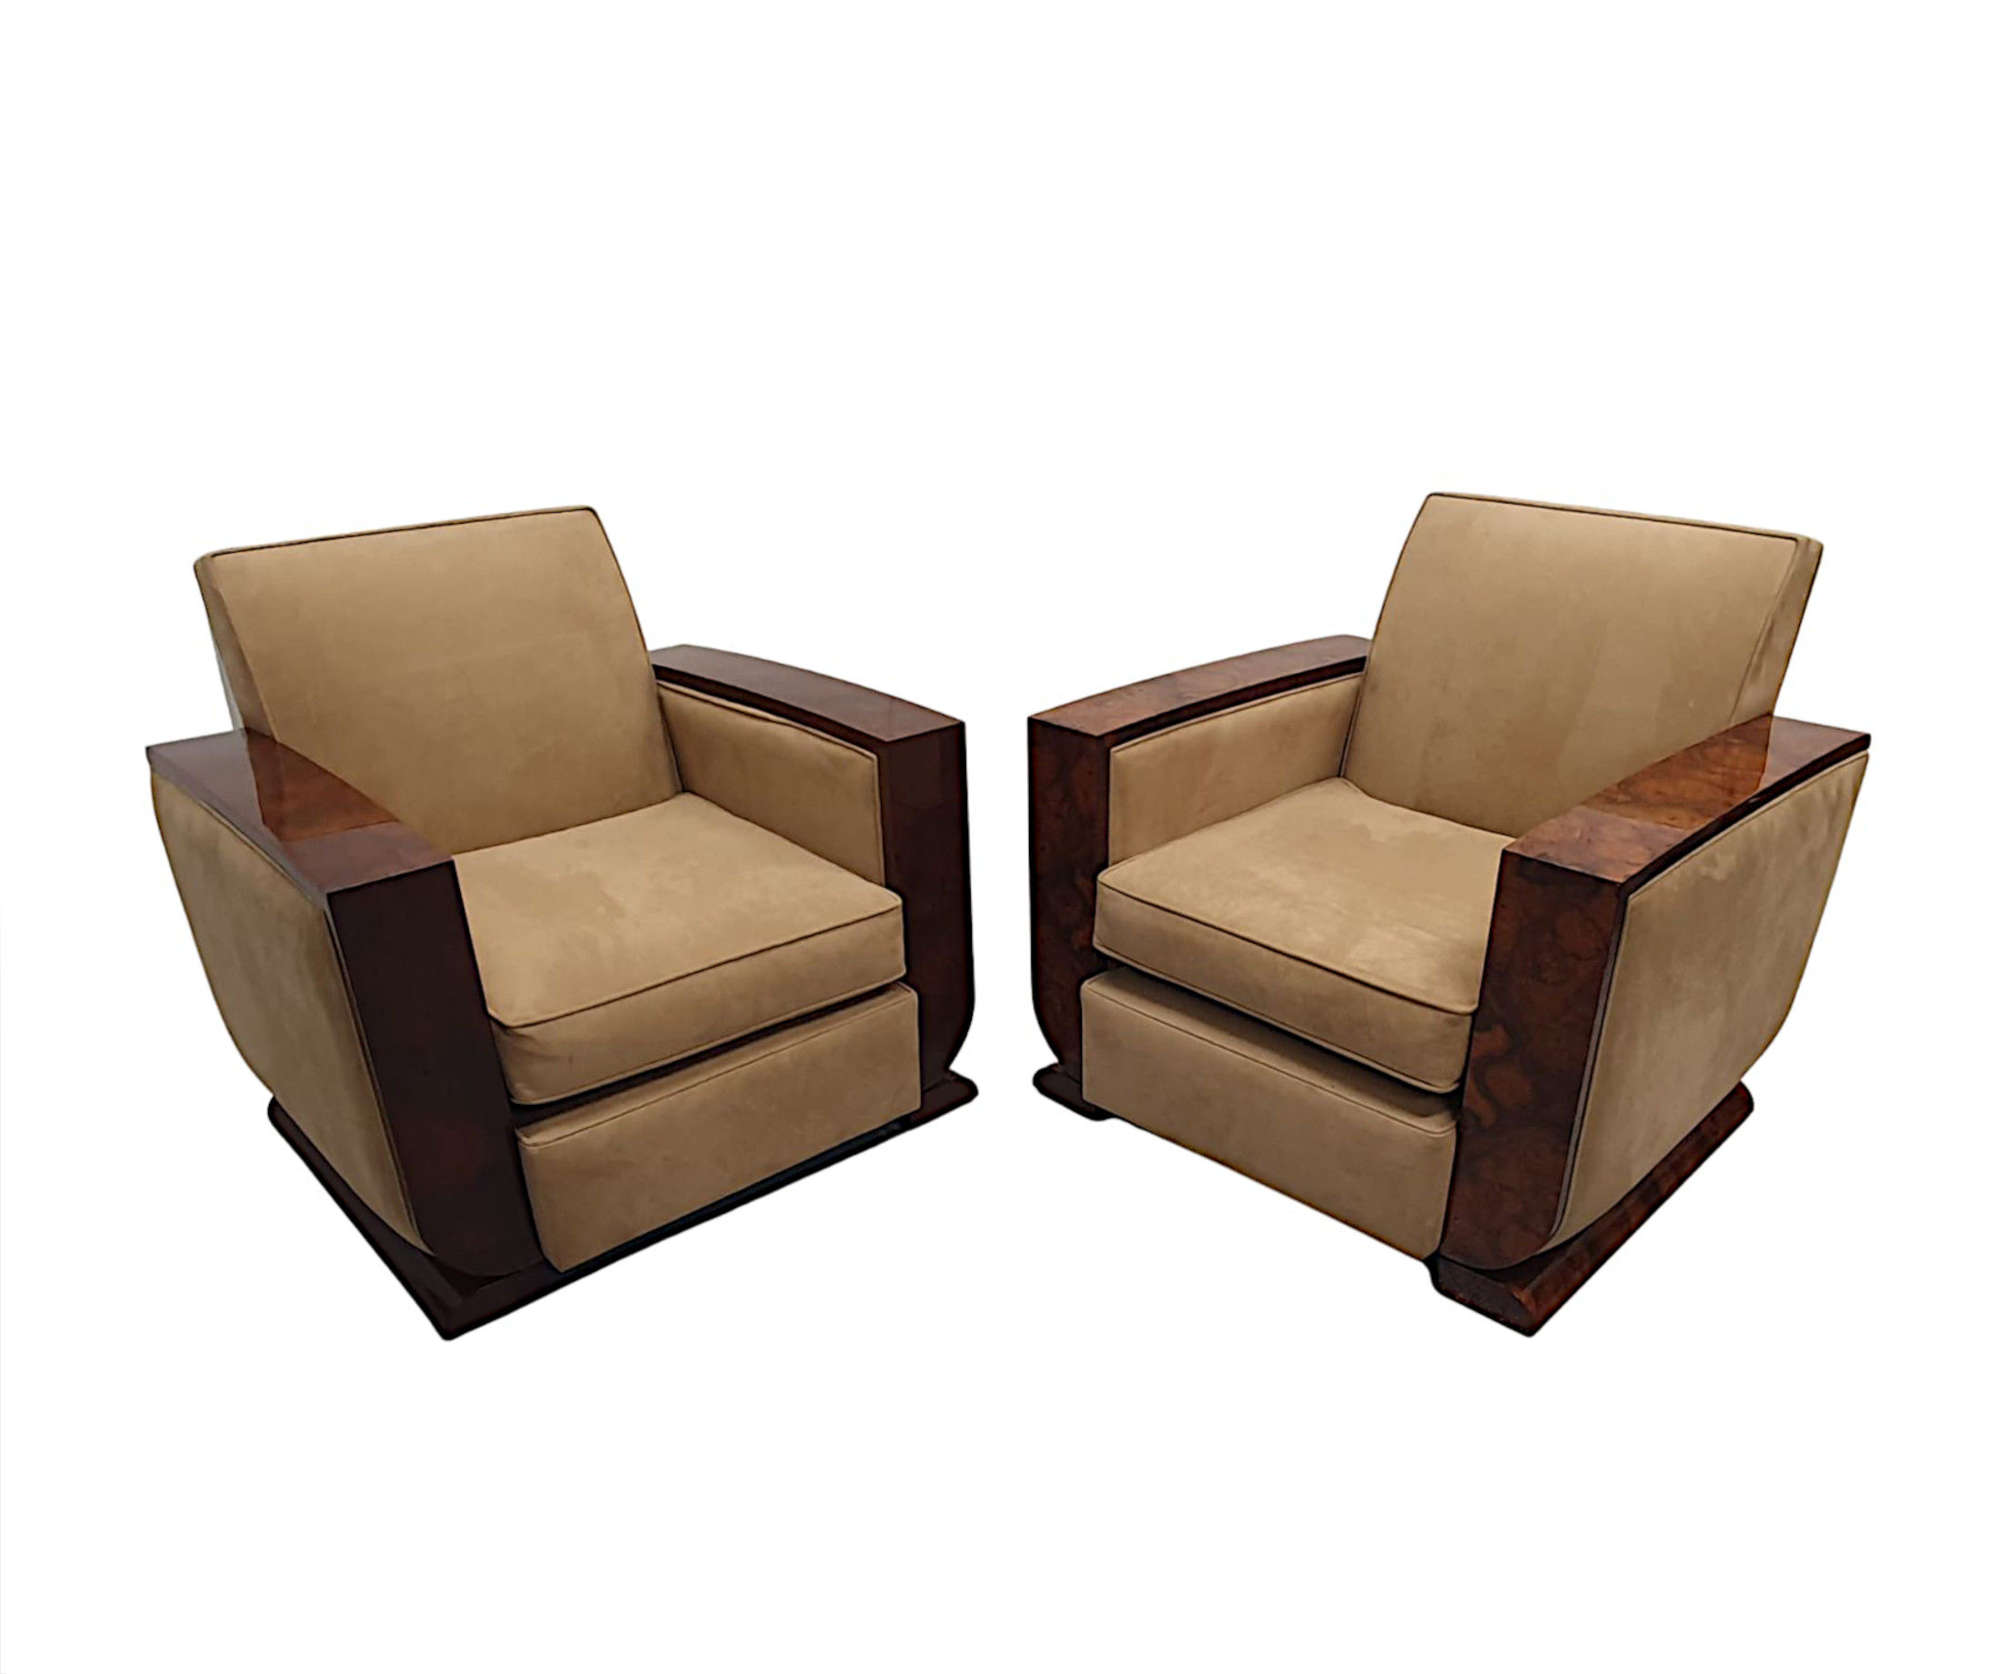 A Fabulous Pair Of 20th Century Art Deco Style Armchairs